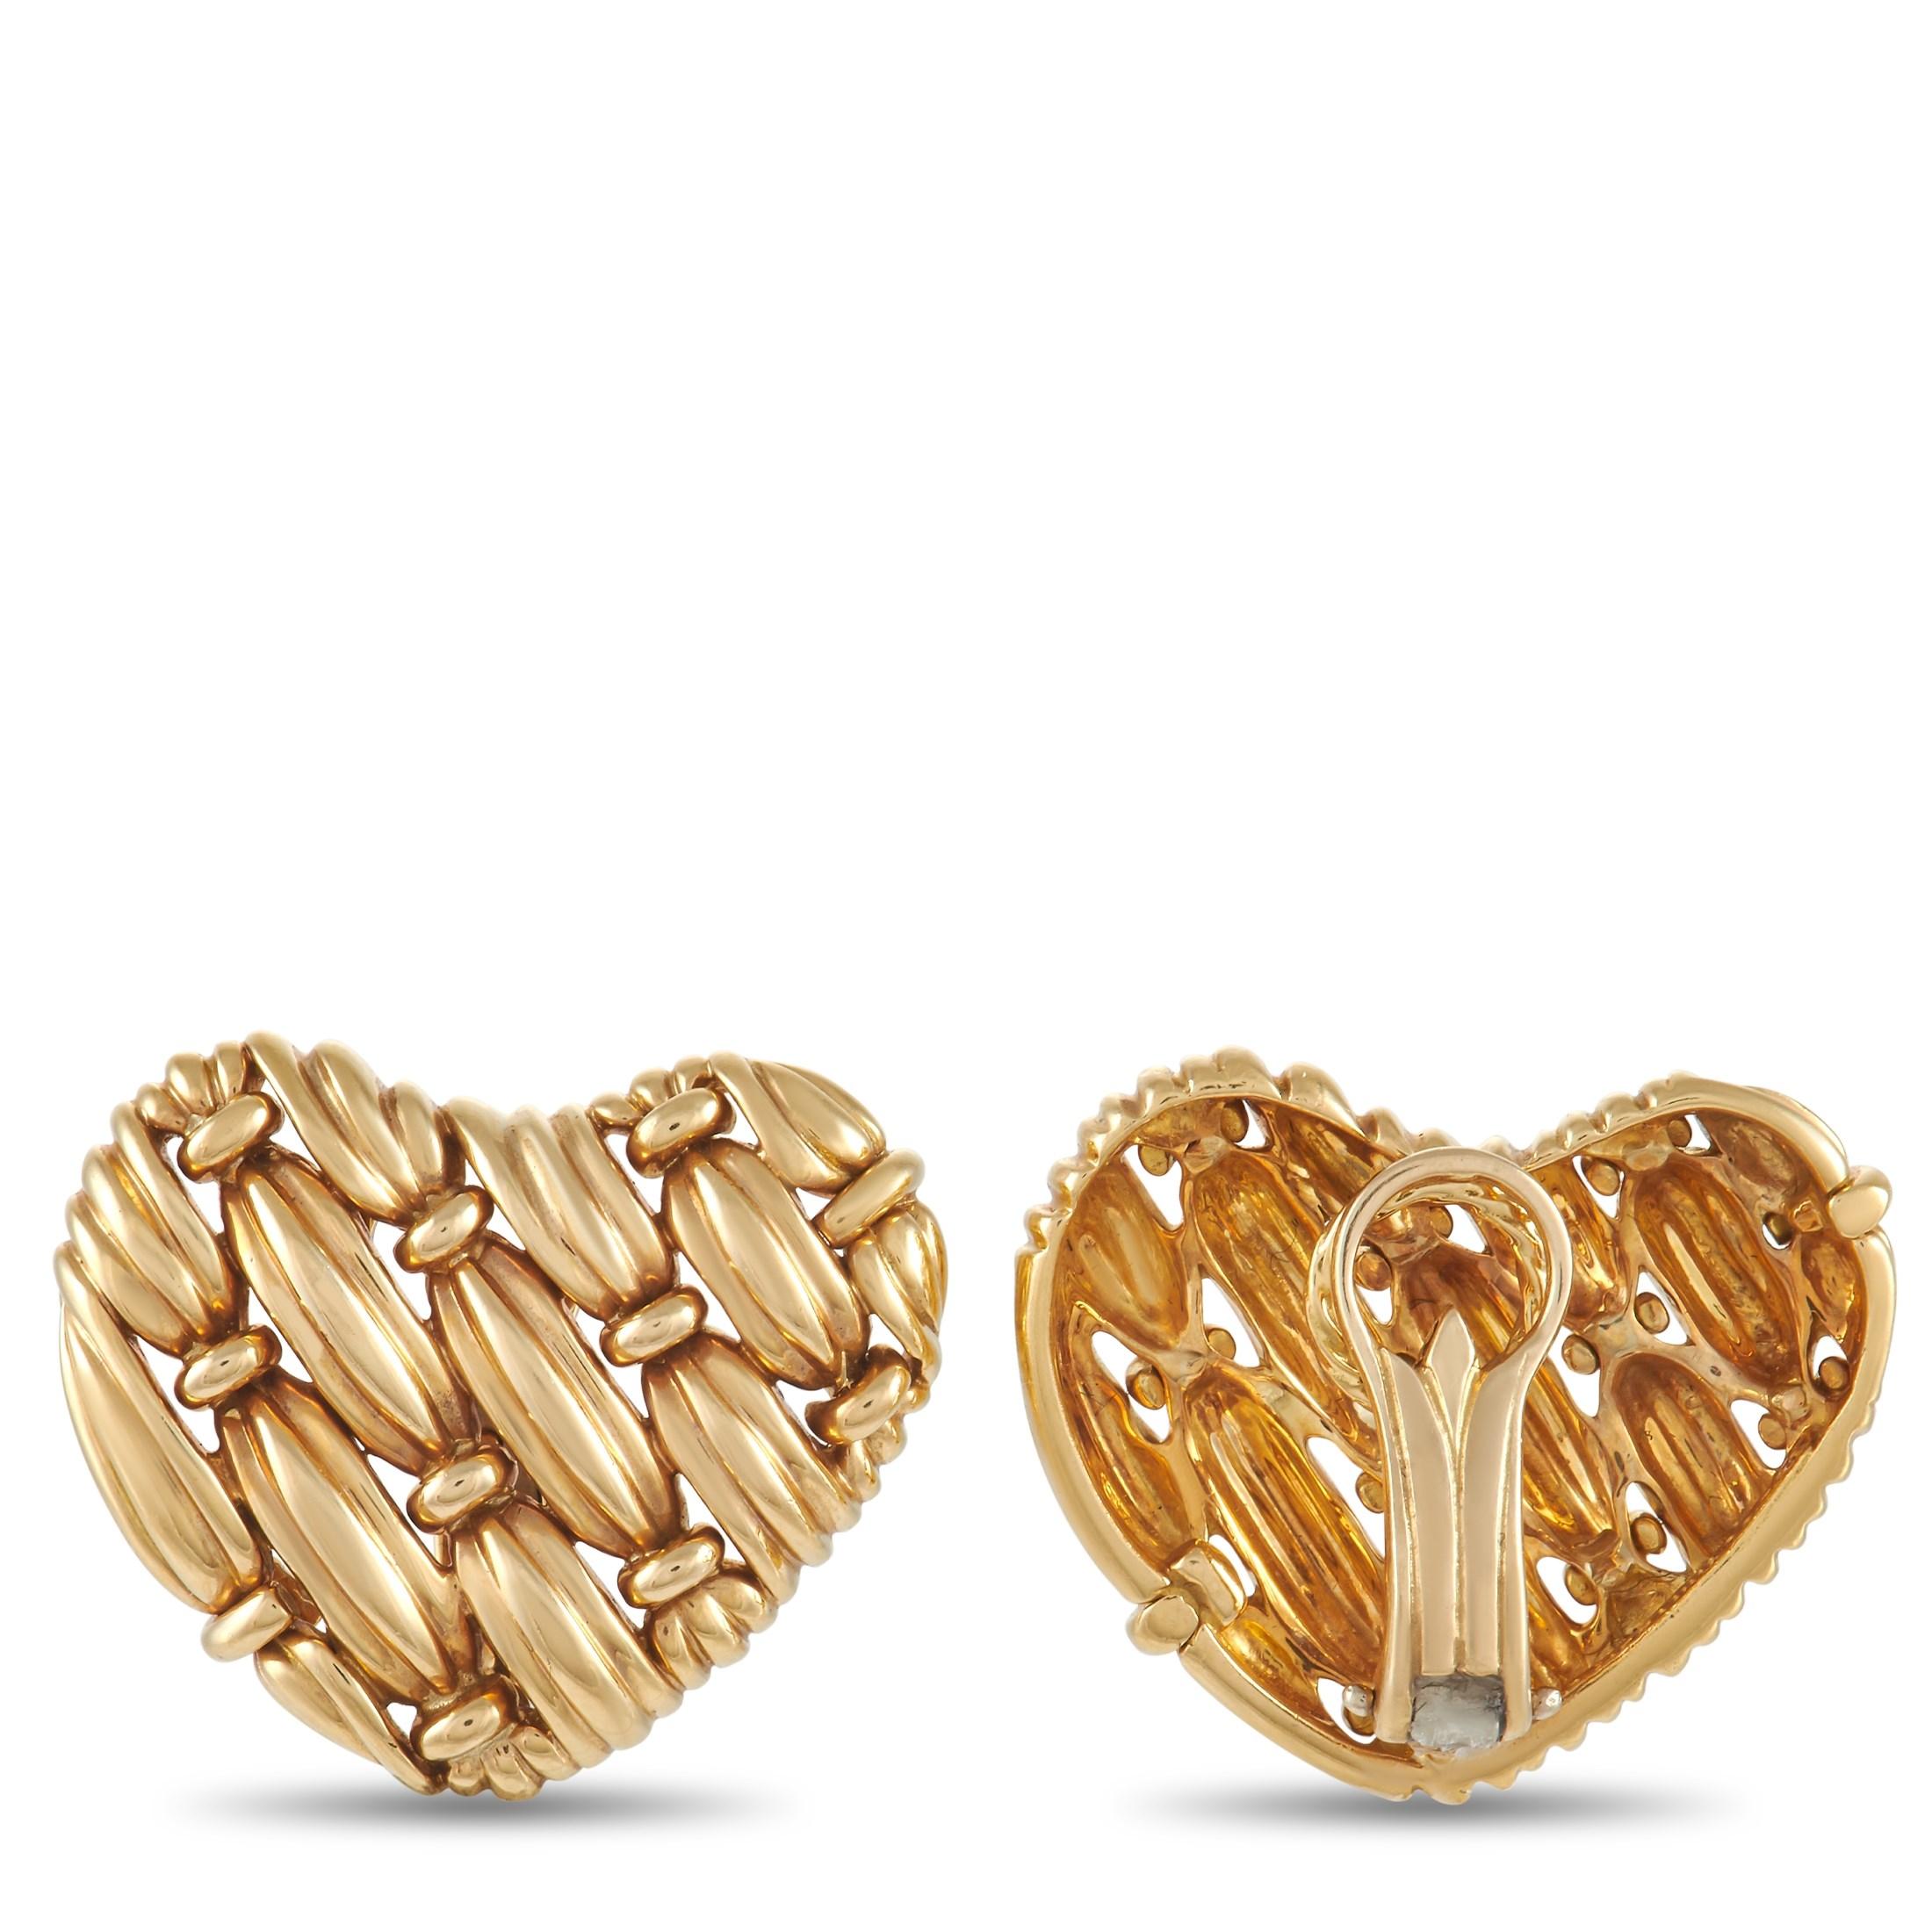 An intricate, textured design makes these heart-shaped earrings from Tiffany & Co. simply exquisite. Crafted from 18K Yellow Gold, each earring measures 0.95” long and 1.0” wide.

This jewelry piece is offered in estate condition and includes a gift